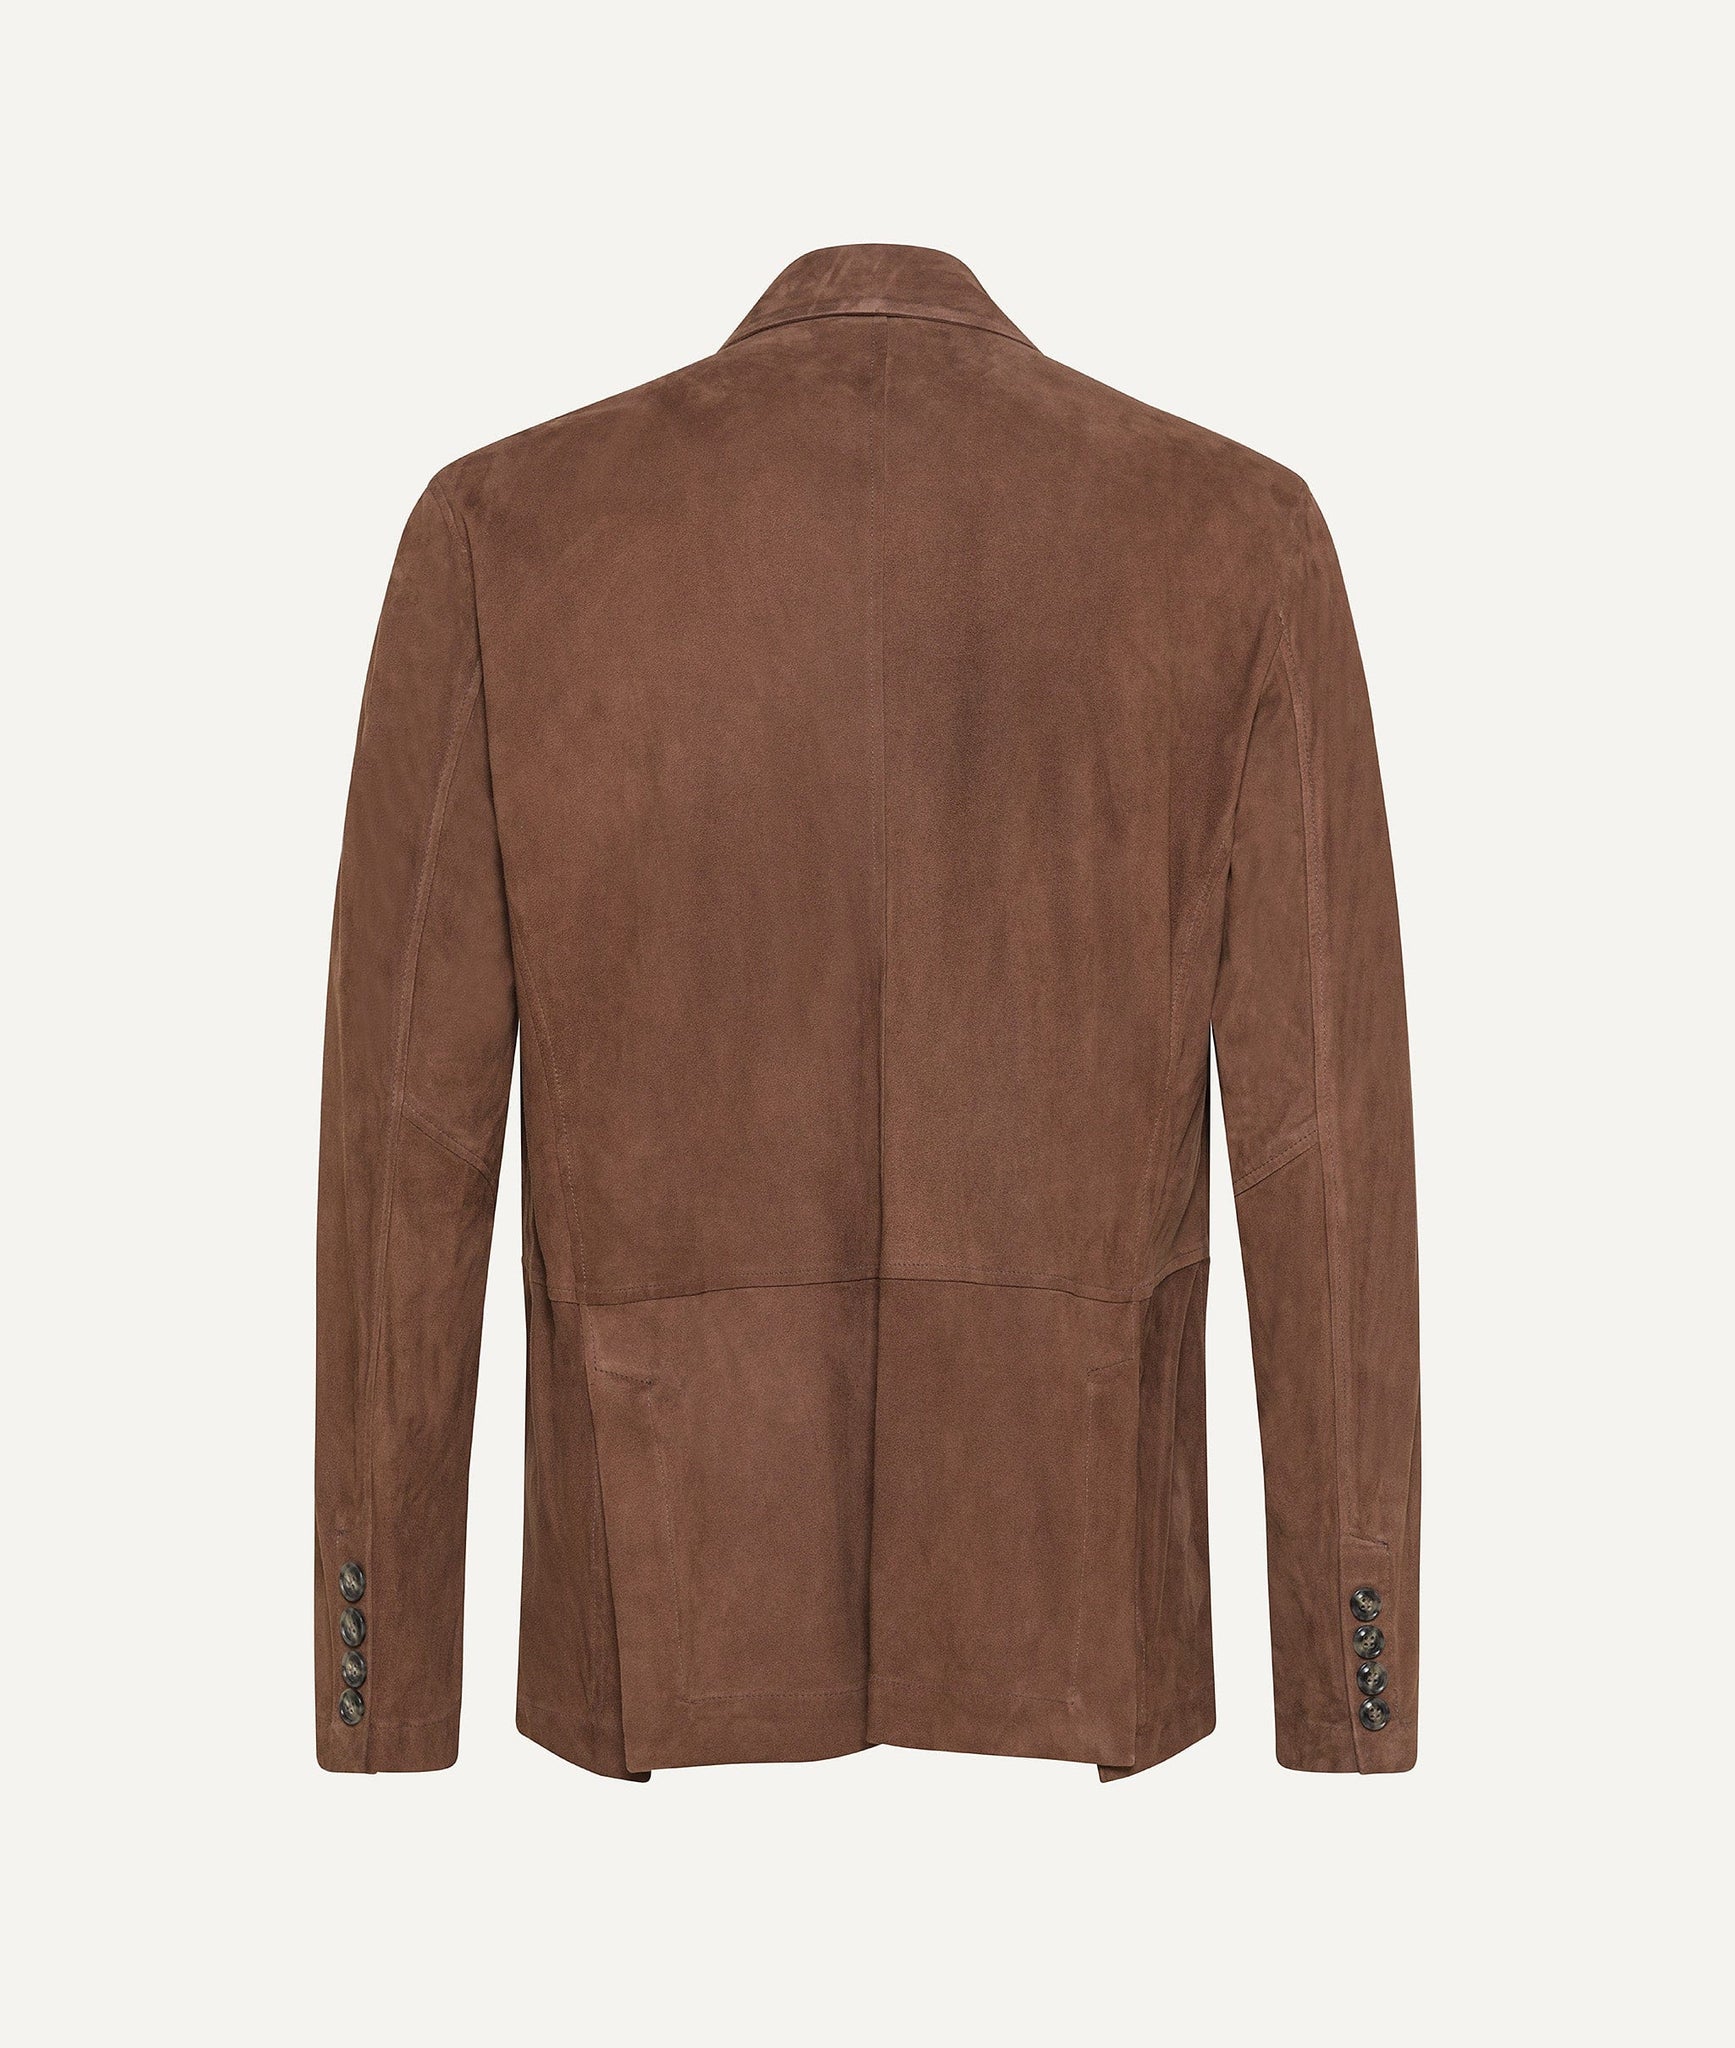 Barba - Leather Jacket in Suede